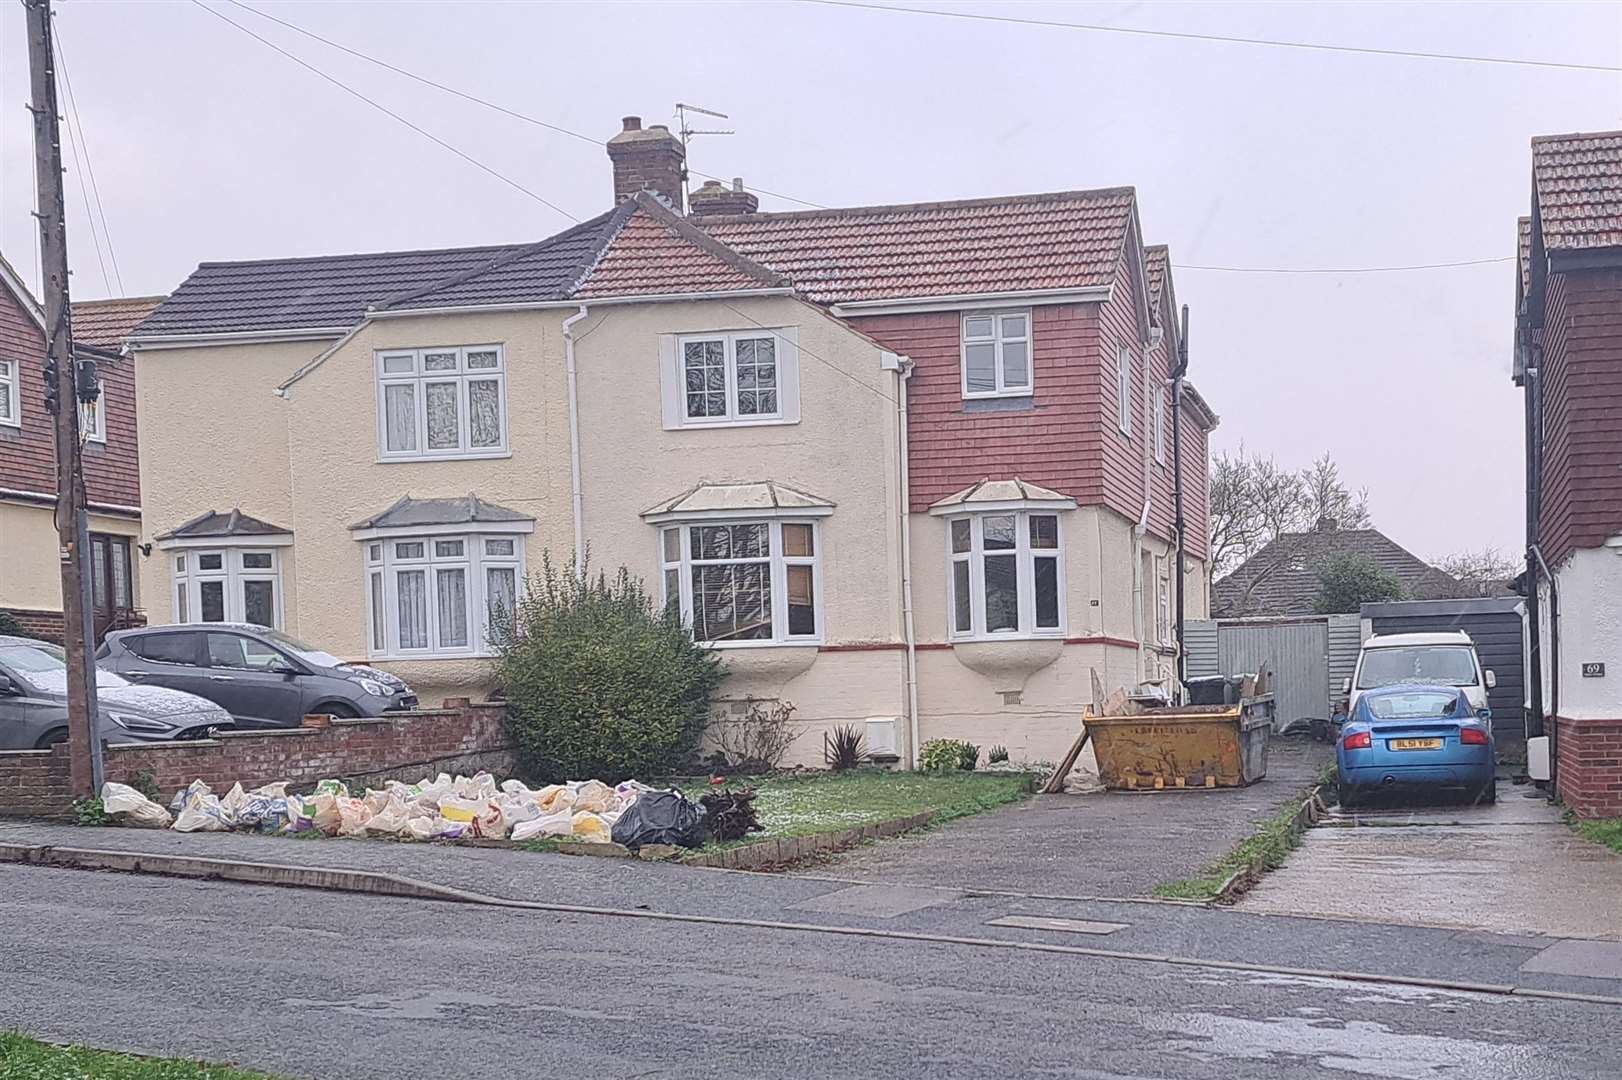 The house with the skip in the yard is the one earmarked for a children's home